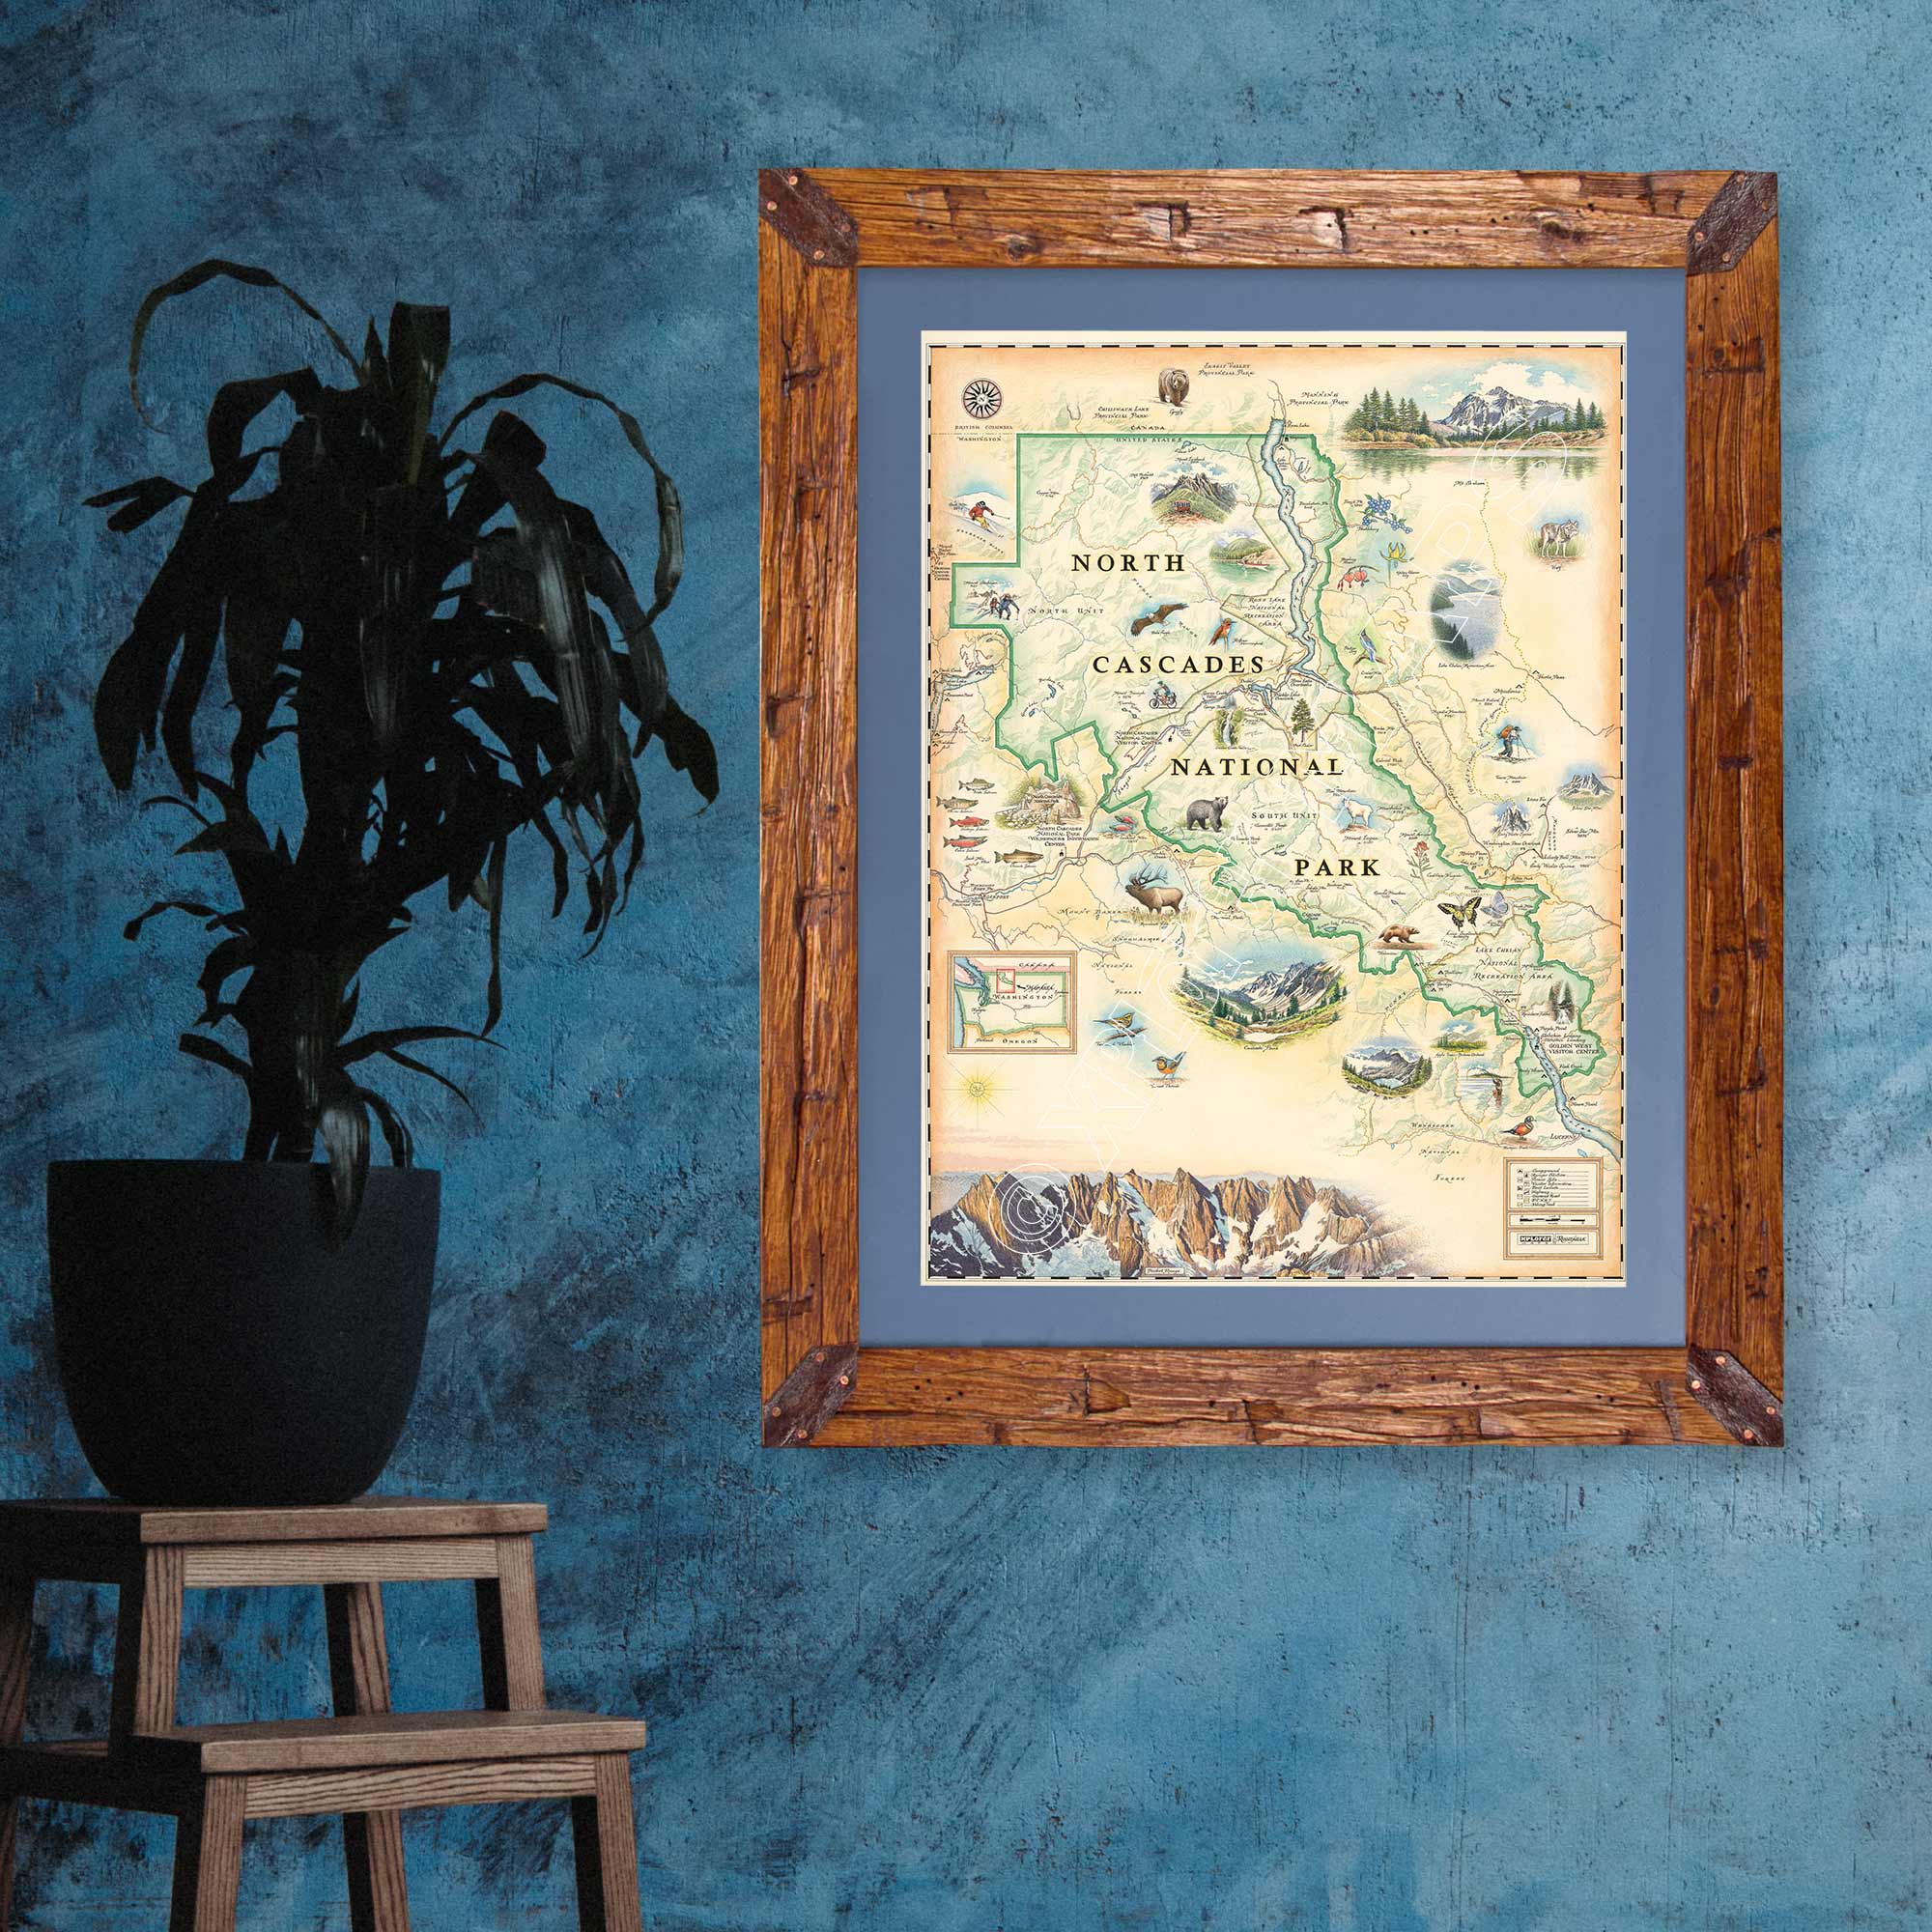 North Cascades National Park hand-drawn map hanging on a blue wall in a Montana Pine Frame and blue mat. There is a plant in a corner. 